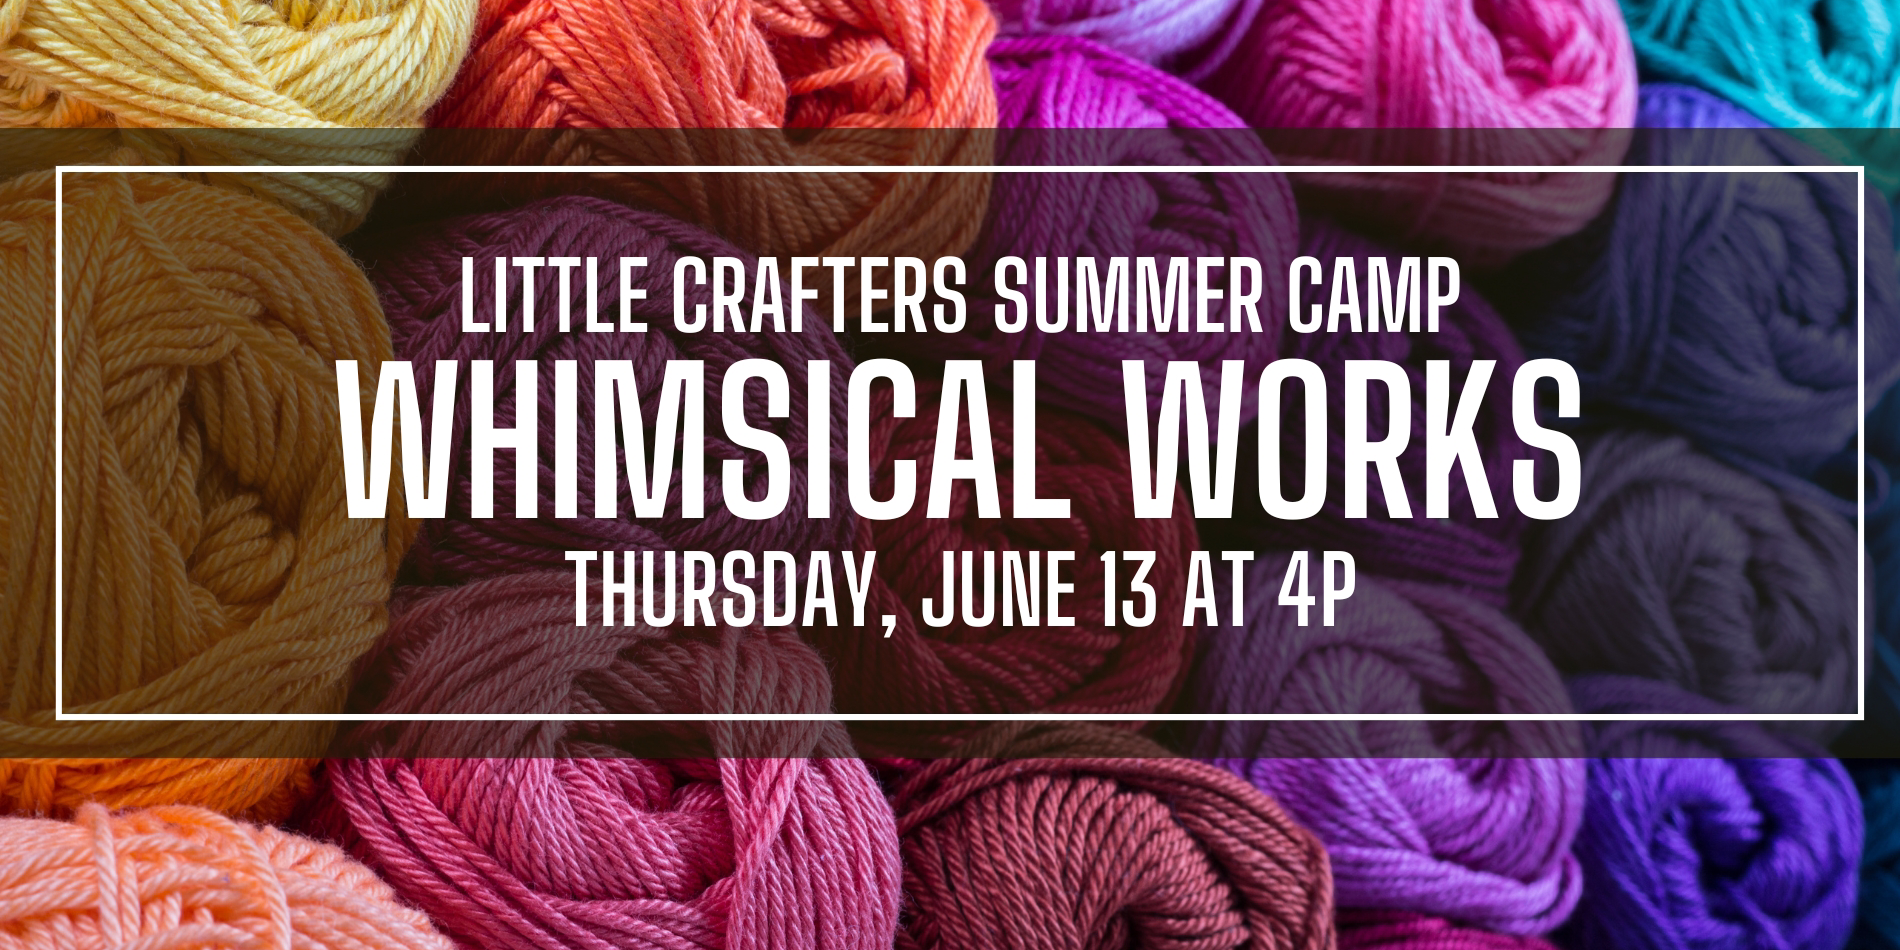 Little Crafters Summer Camp: Whimsical Works